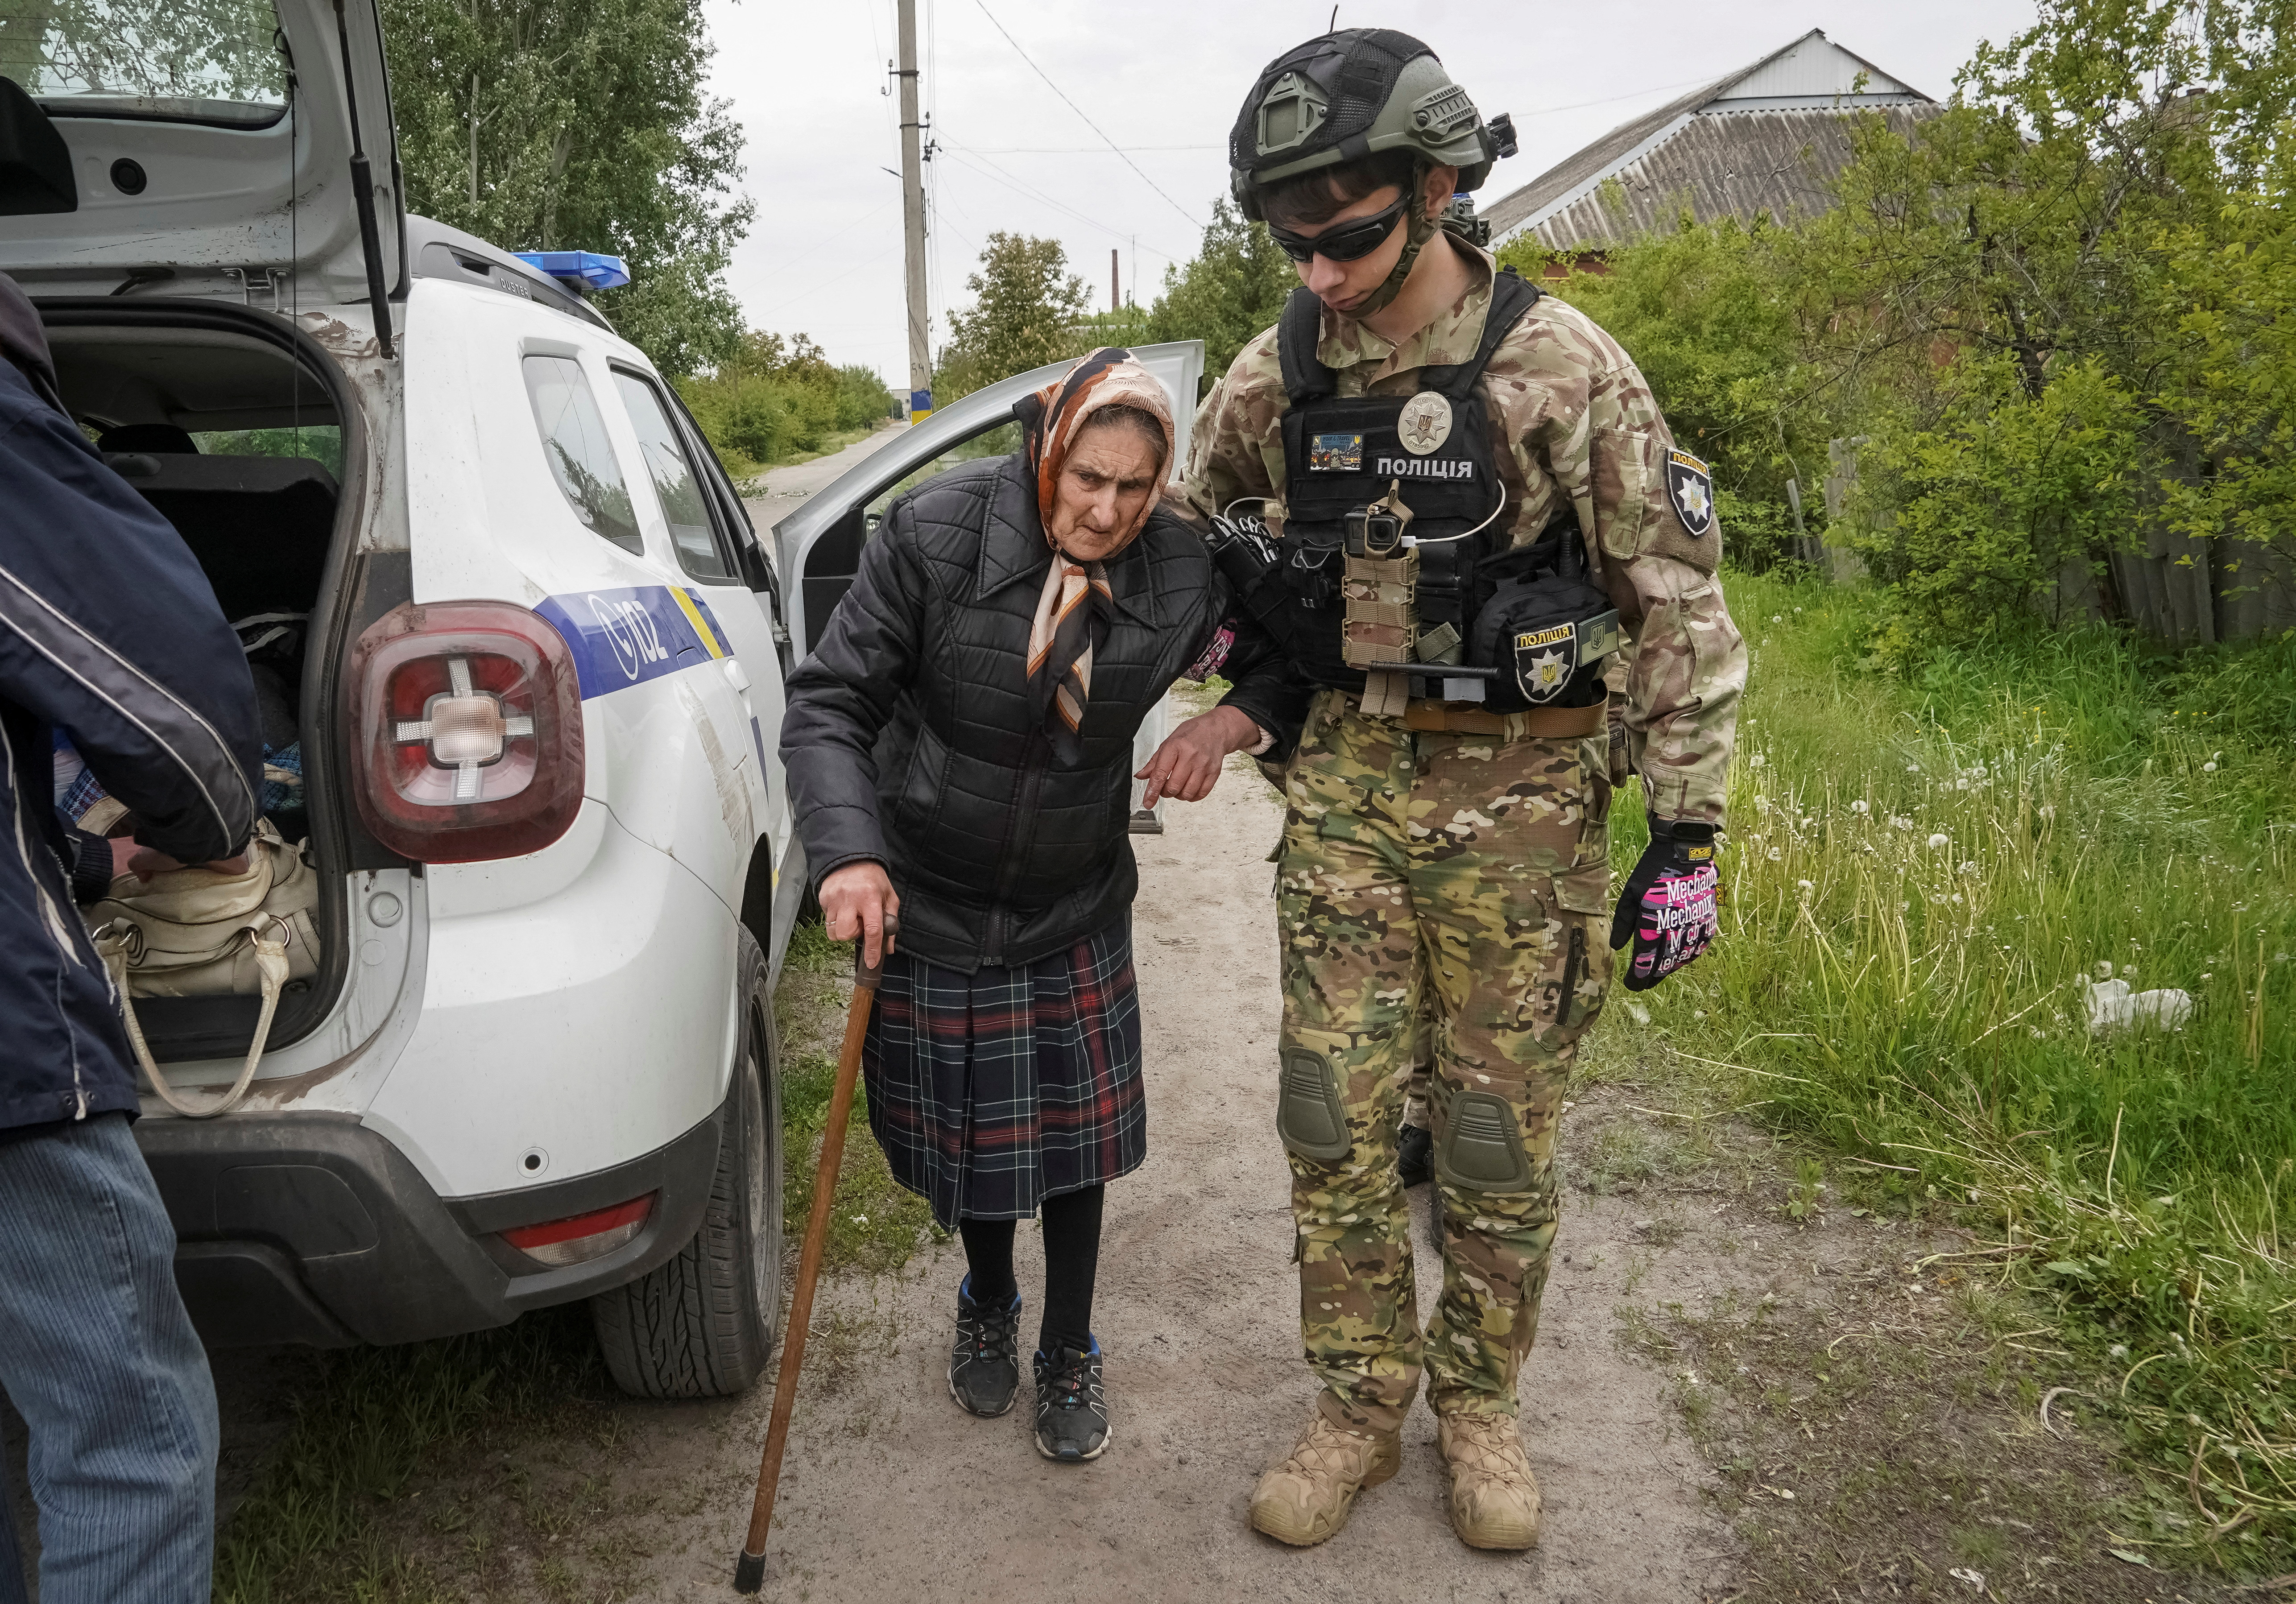 A police officer helps a local resident during an evacuation to Kharkiv due to Russian shelling in the town of Vovchansk